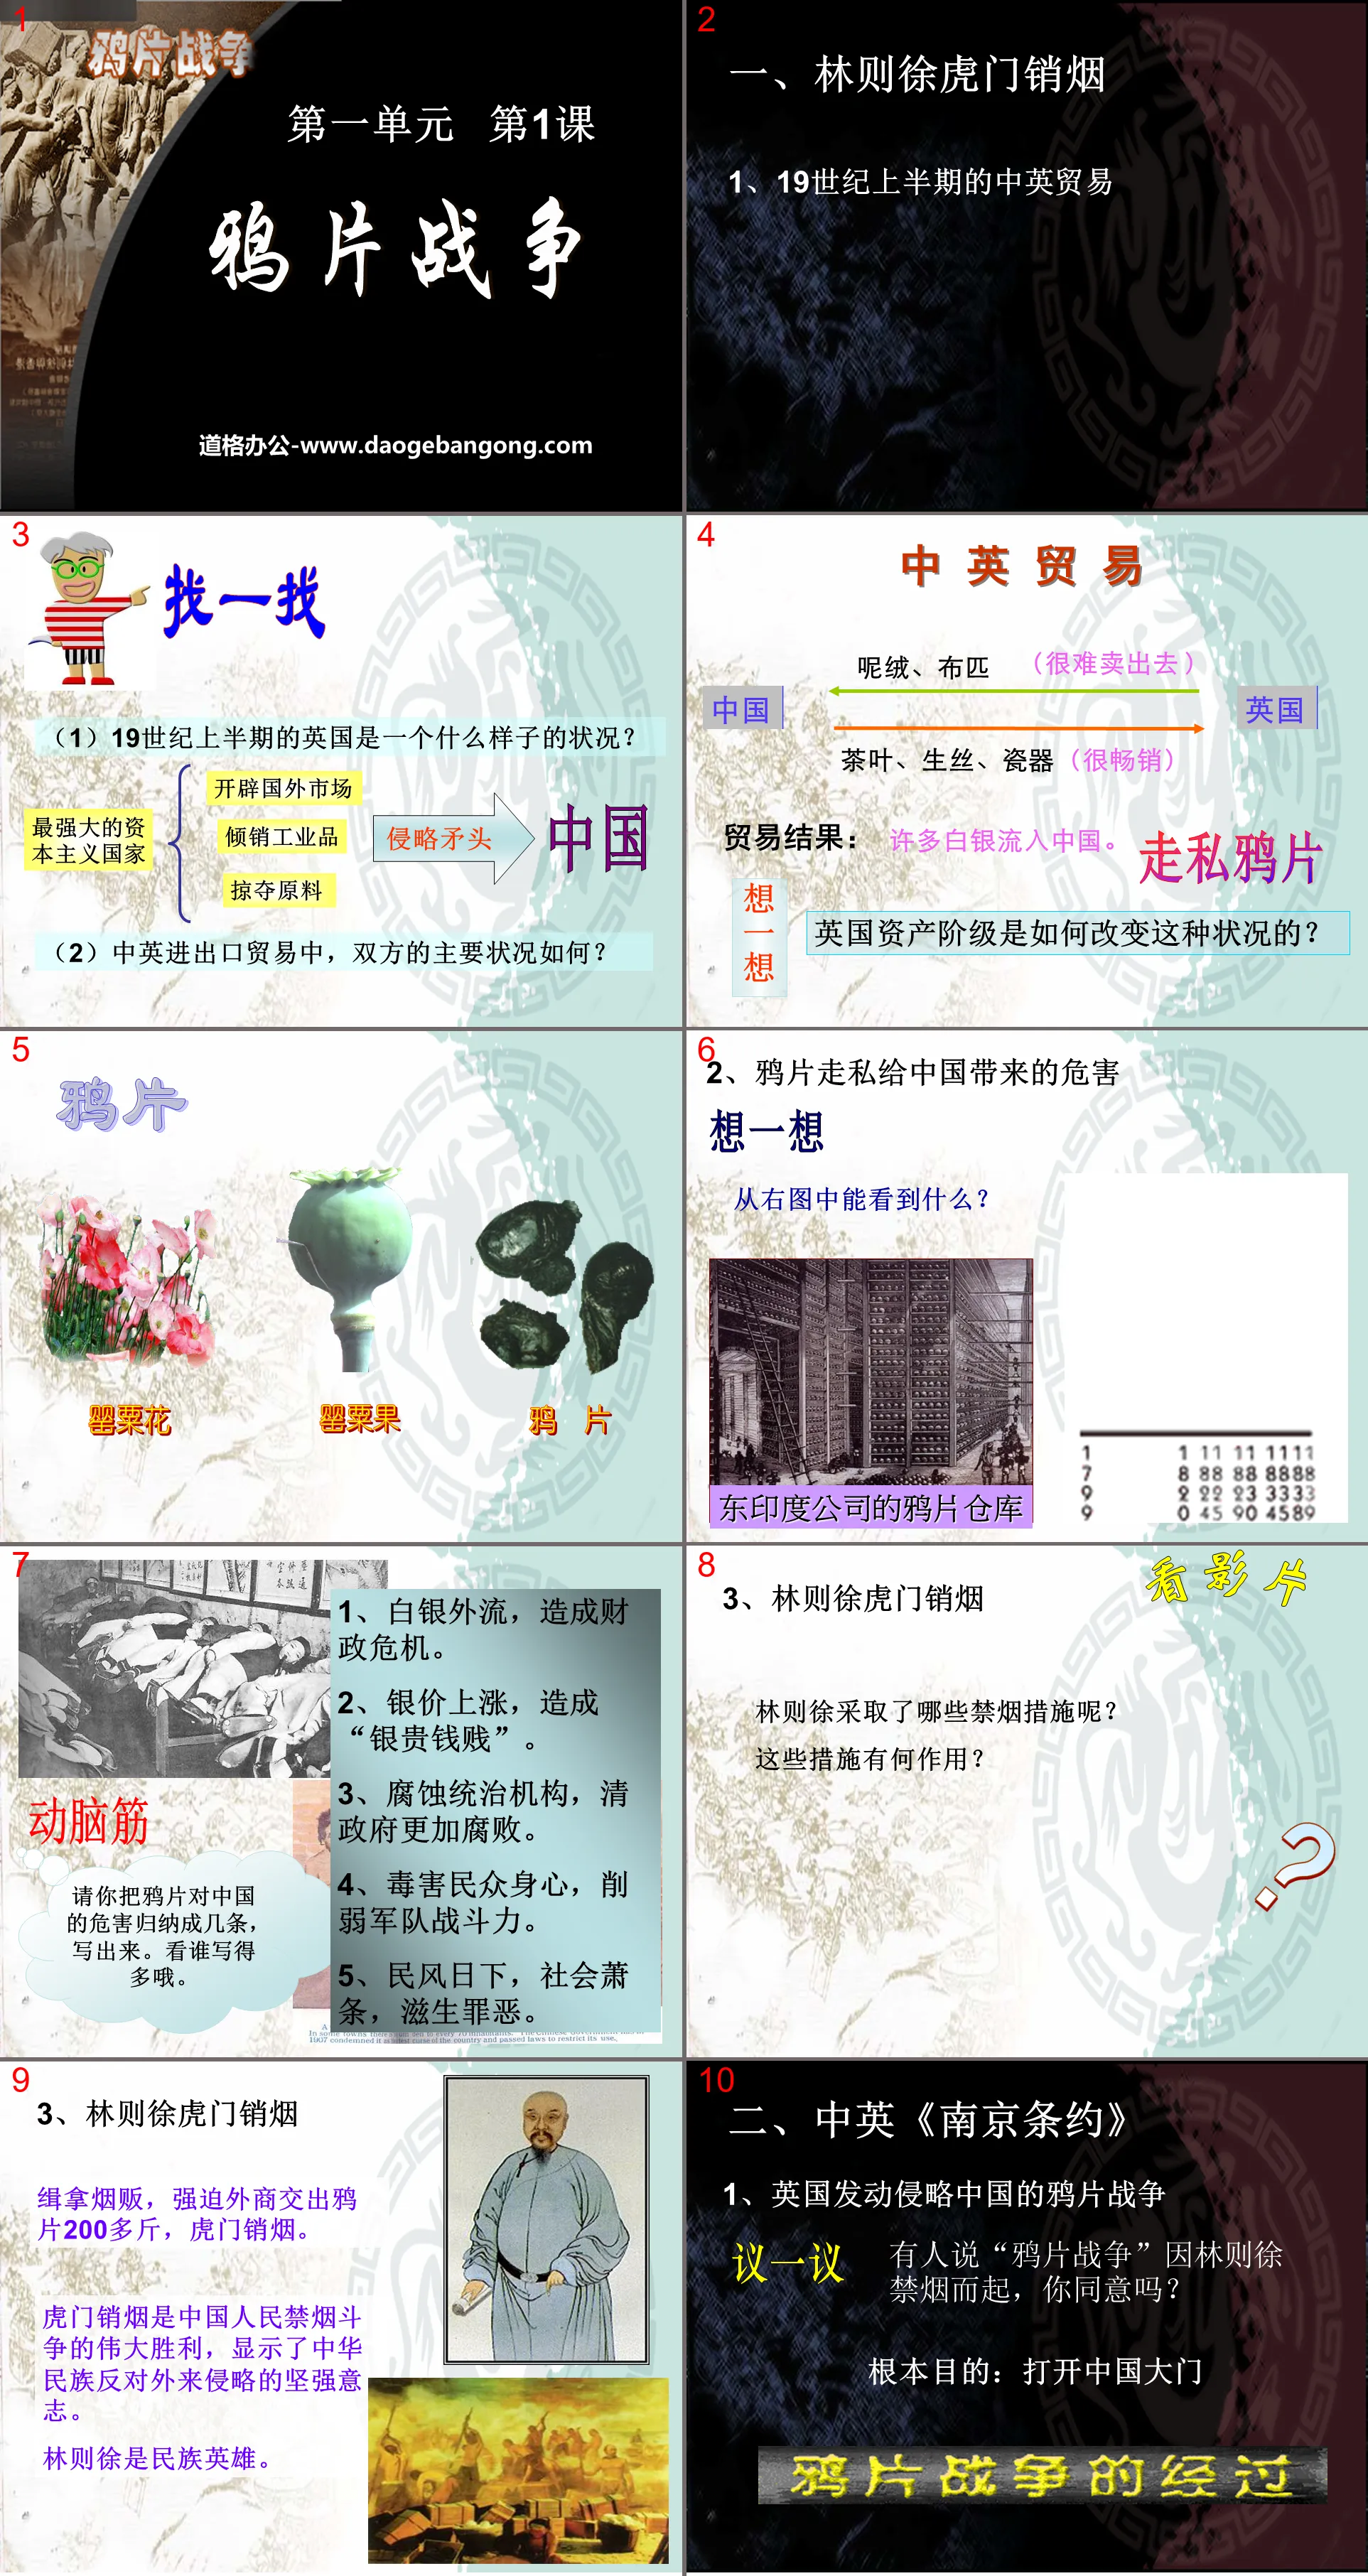 "The Opium War" The invasion of China by foreign powers and the survival of the nation in the late Qing Dynasty PPT courseware 3